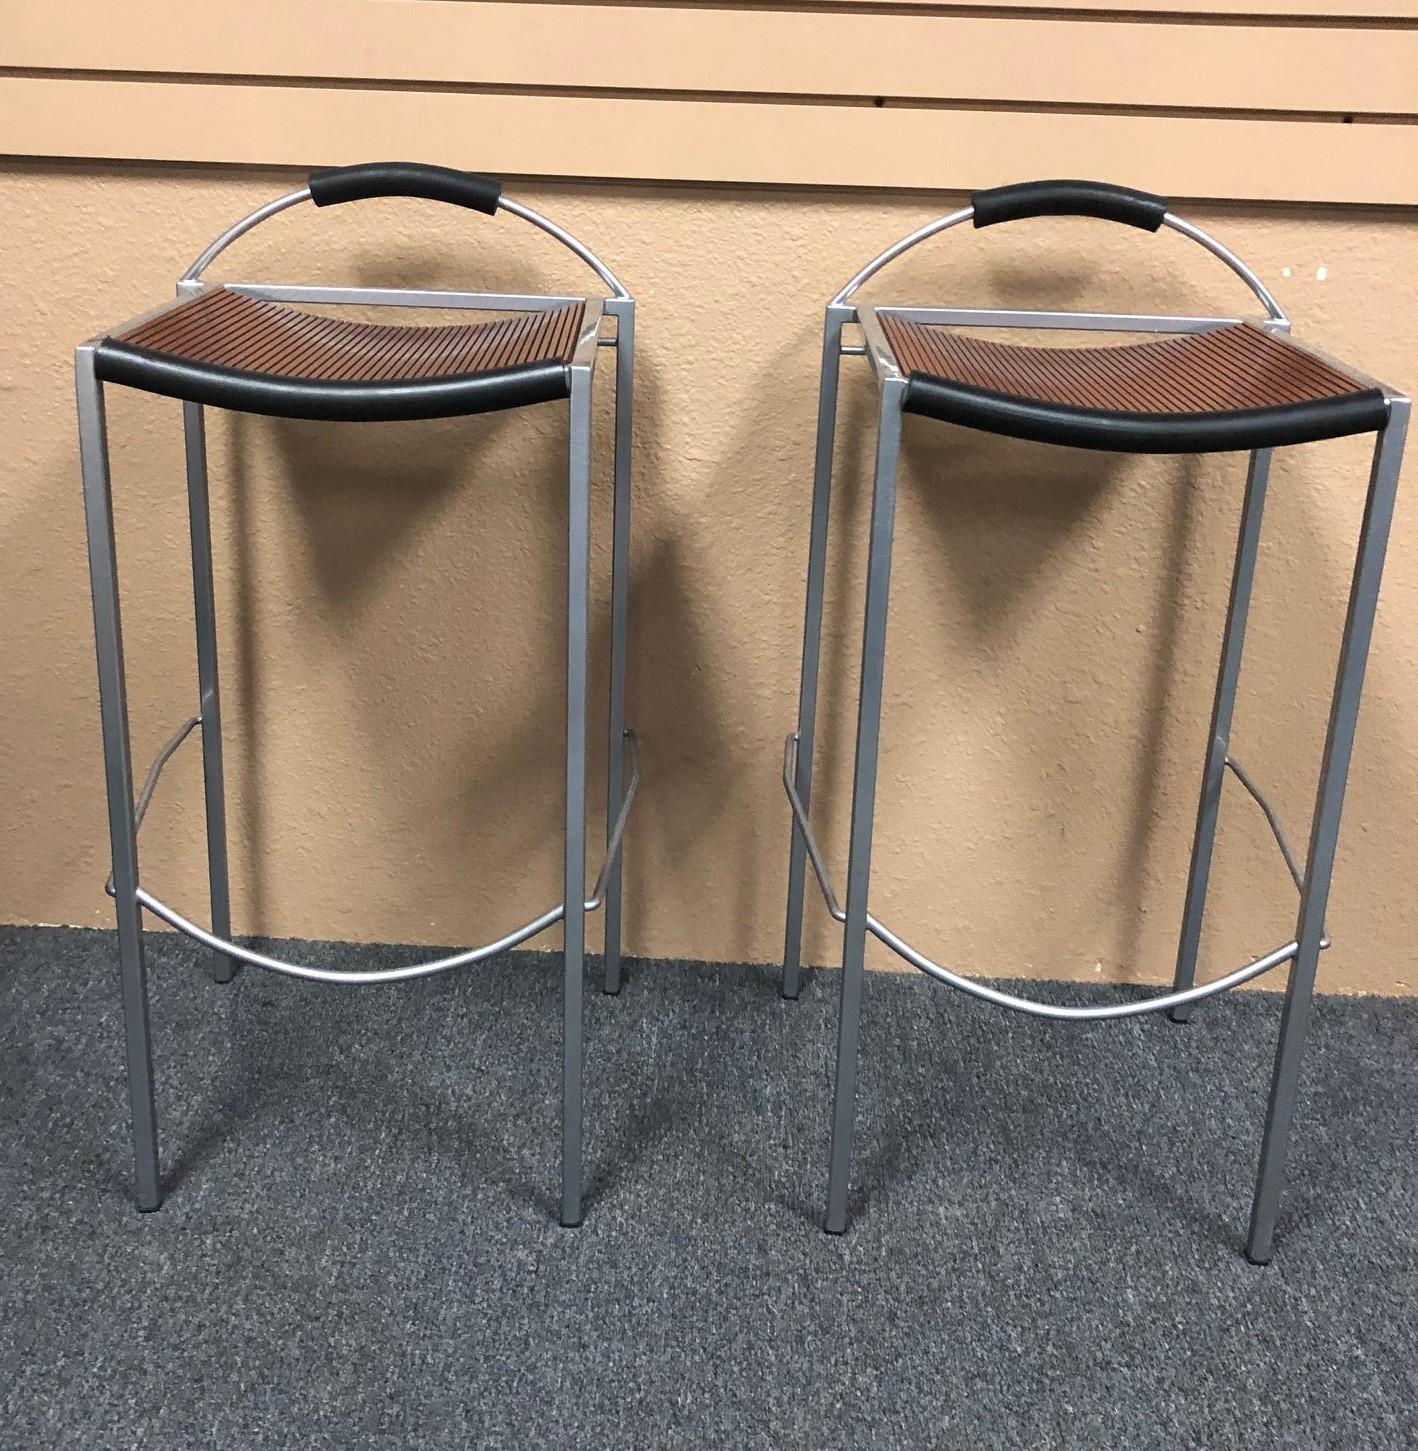 Pair of Sgabello counter stools by Maurizio Peregalli for Zeus, circa 1990s. The seats are a dark brown wood on a steel base with black rubber accents; very stylish!